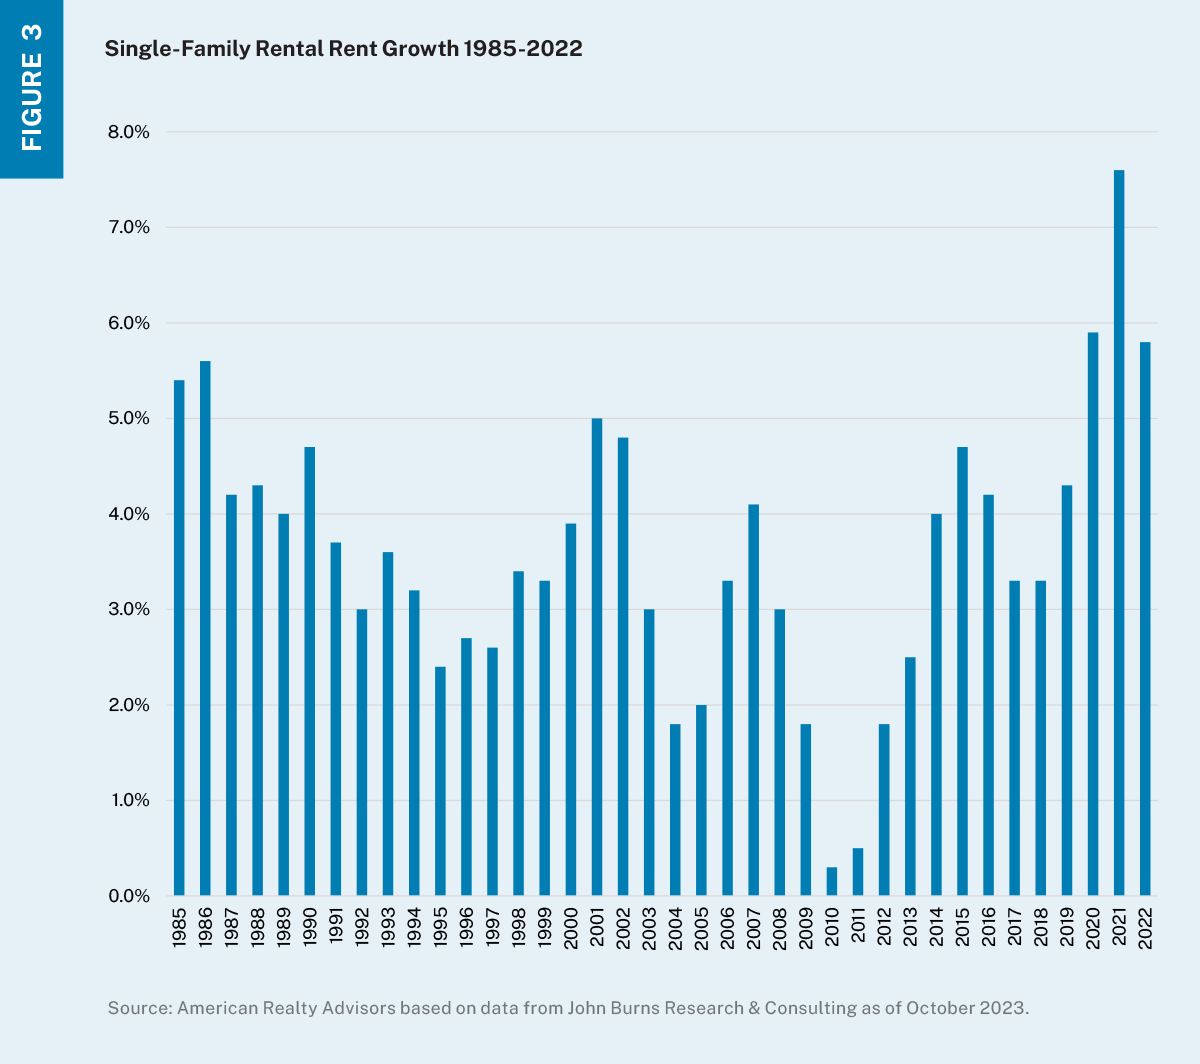 Bar chart depicting annual single-family rental rate growth. 